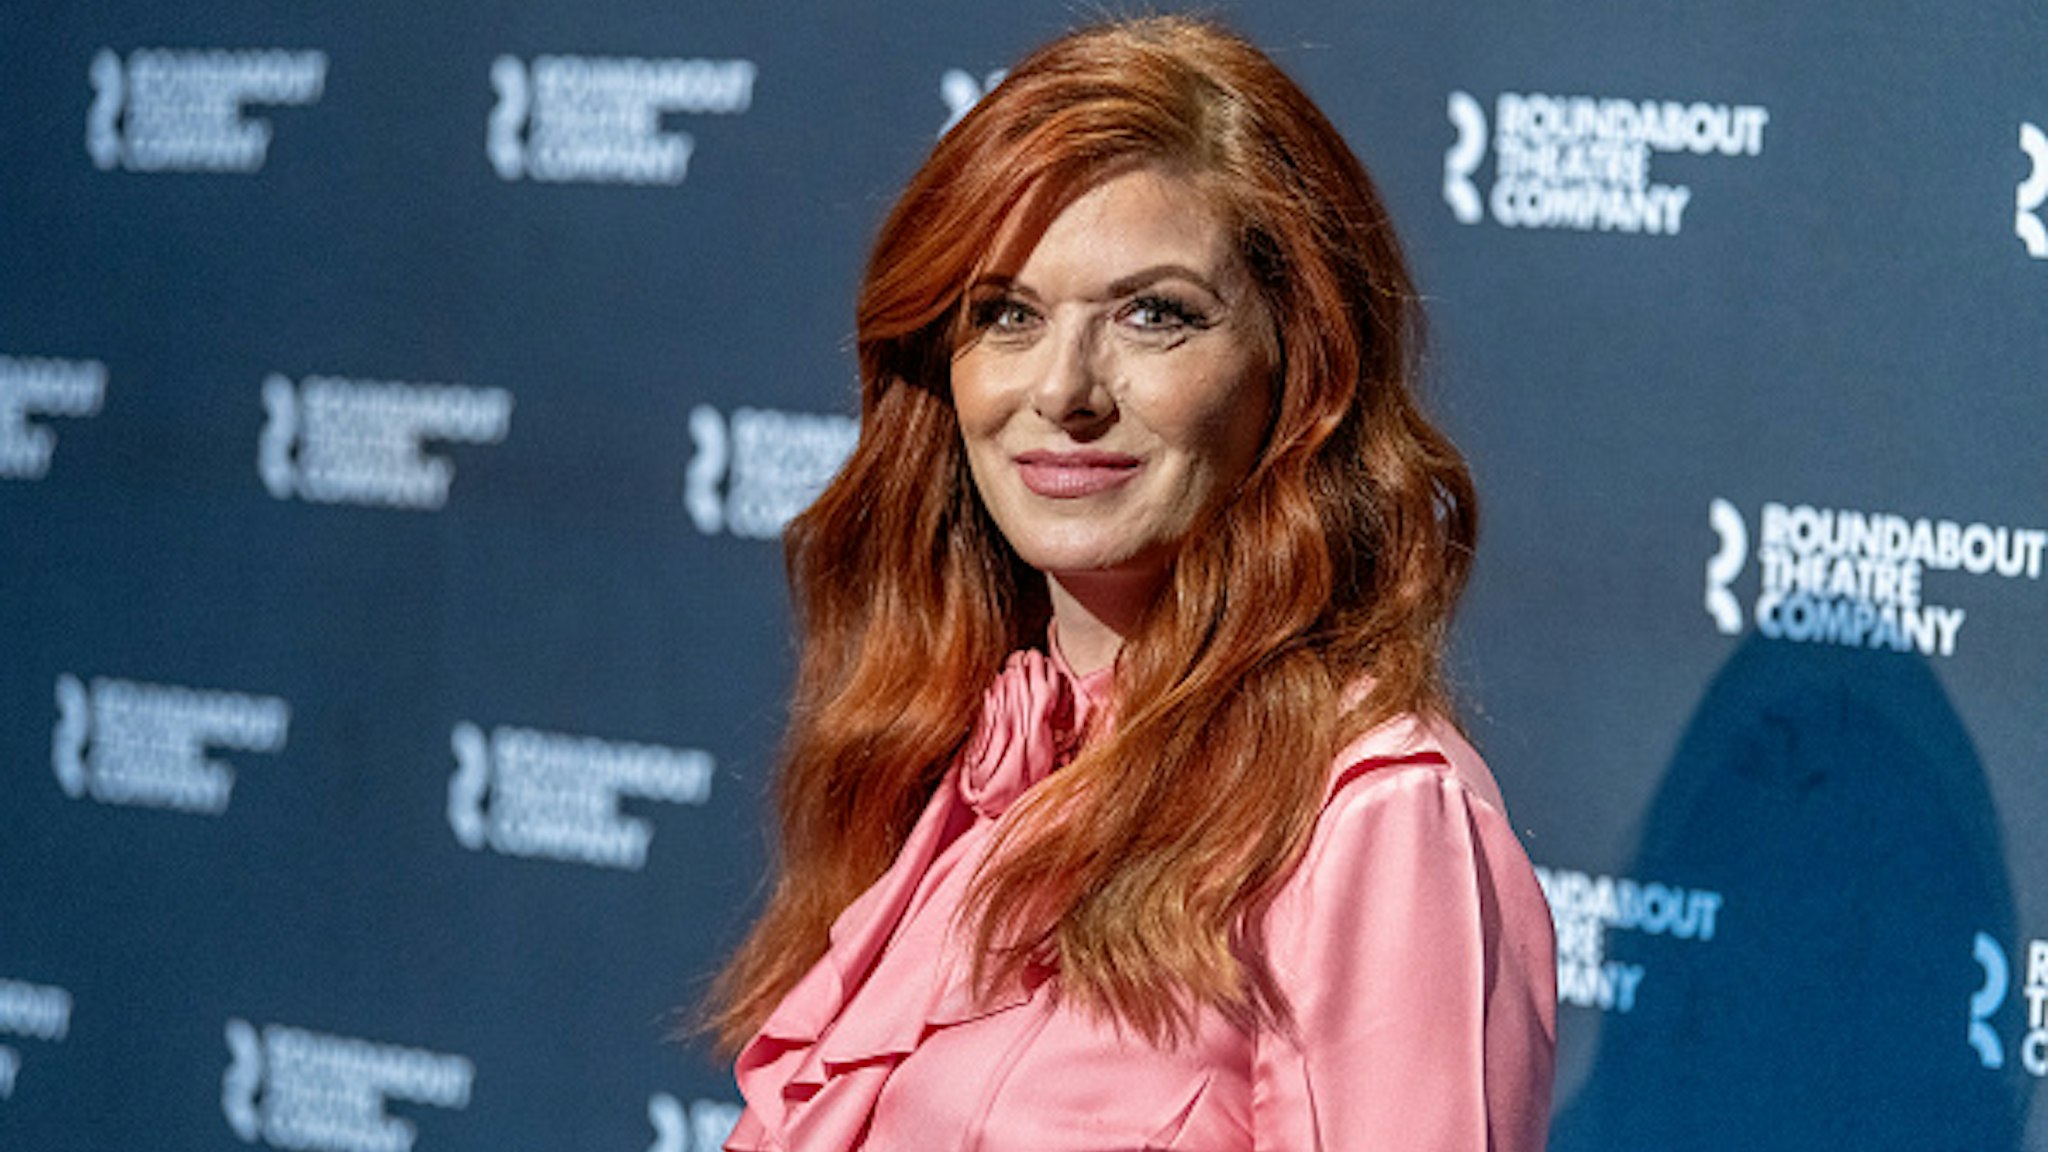 NEW YORK, NEW YORK - MARCH 12: Debra Messing attends the "Birthday Candles" Photocall at American Airlines Theatre on March 12, 2020 in New York City.